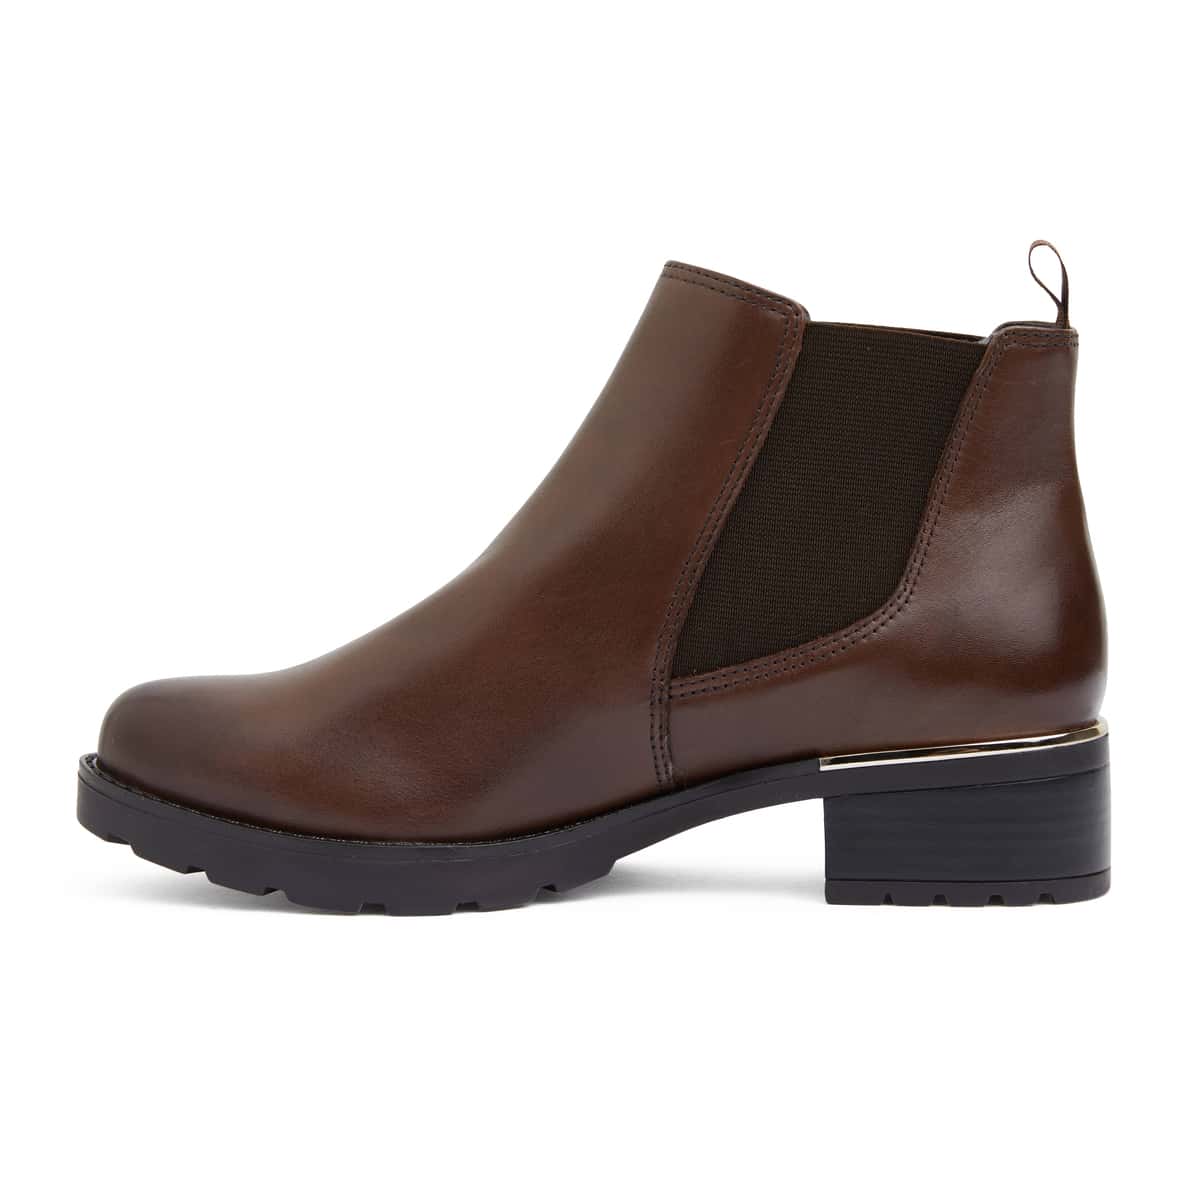 Iowa Boot in Brown Leather